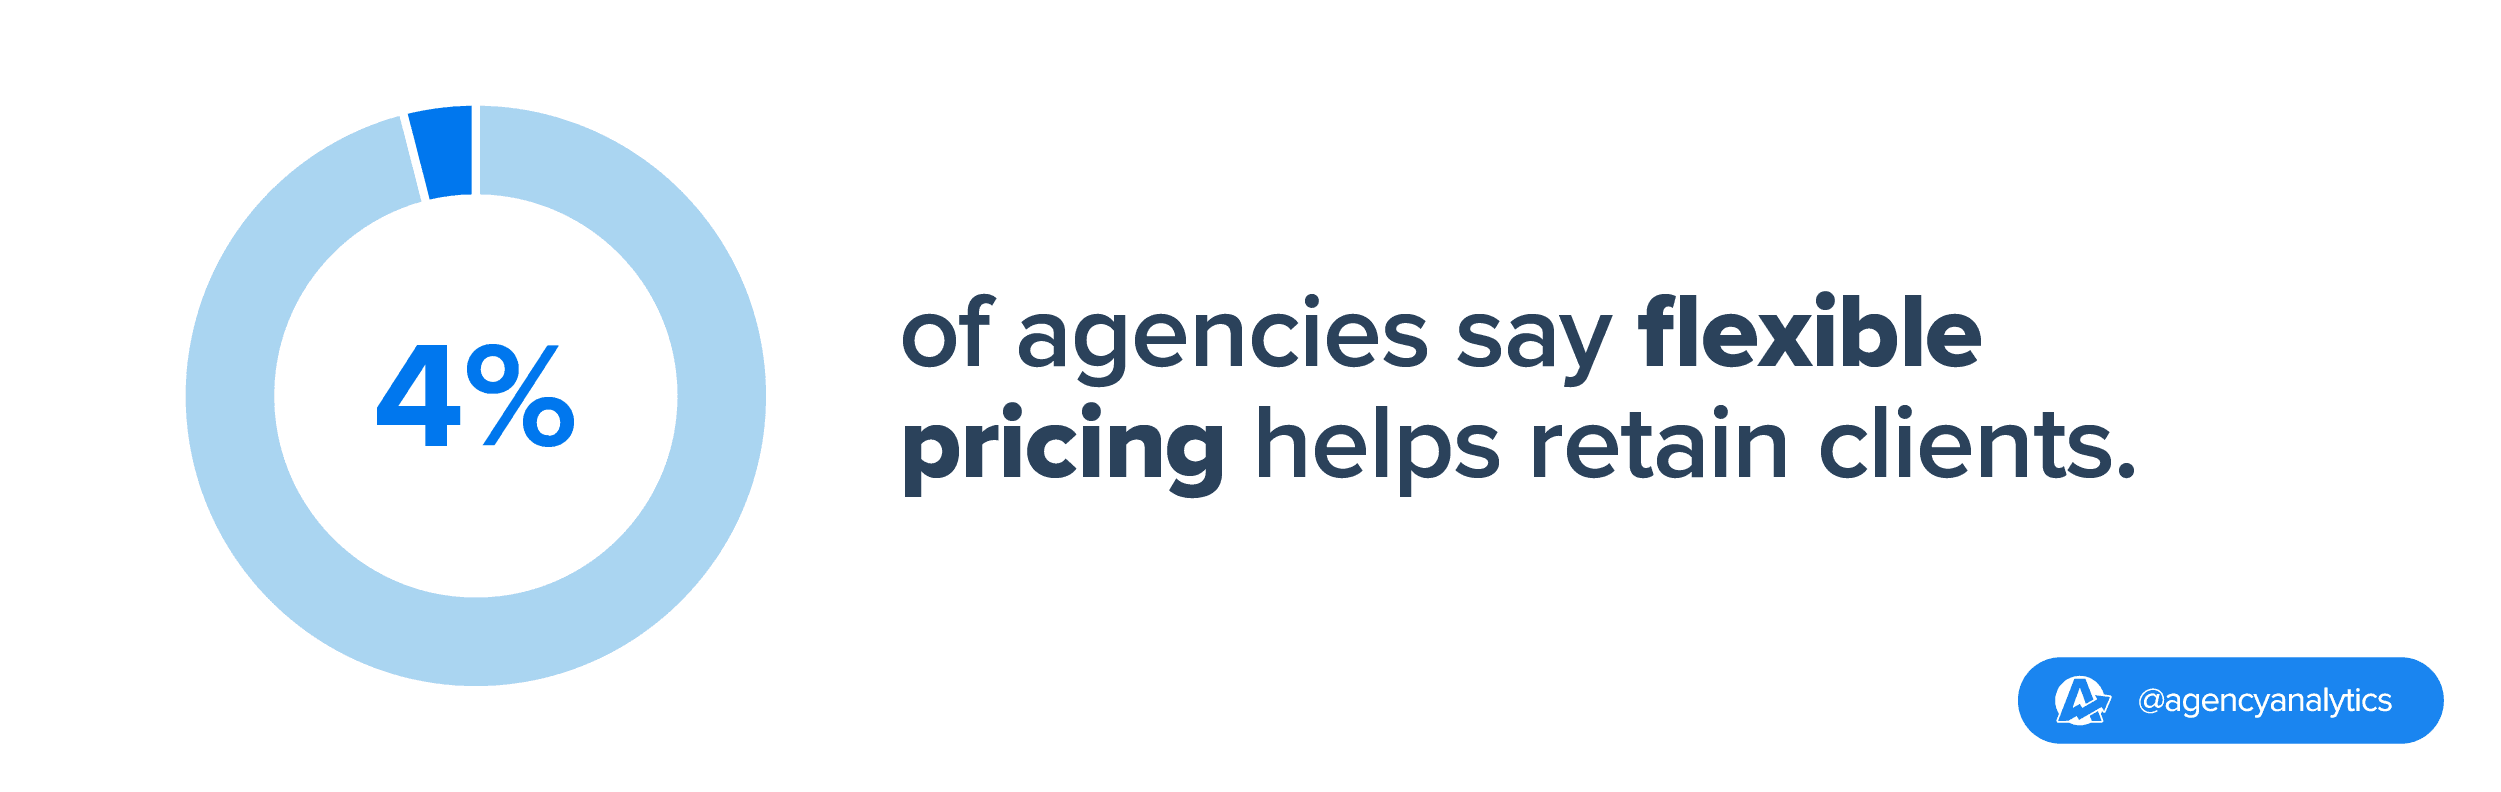 4% of agencies attribute client retention to flexible pricing